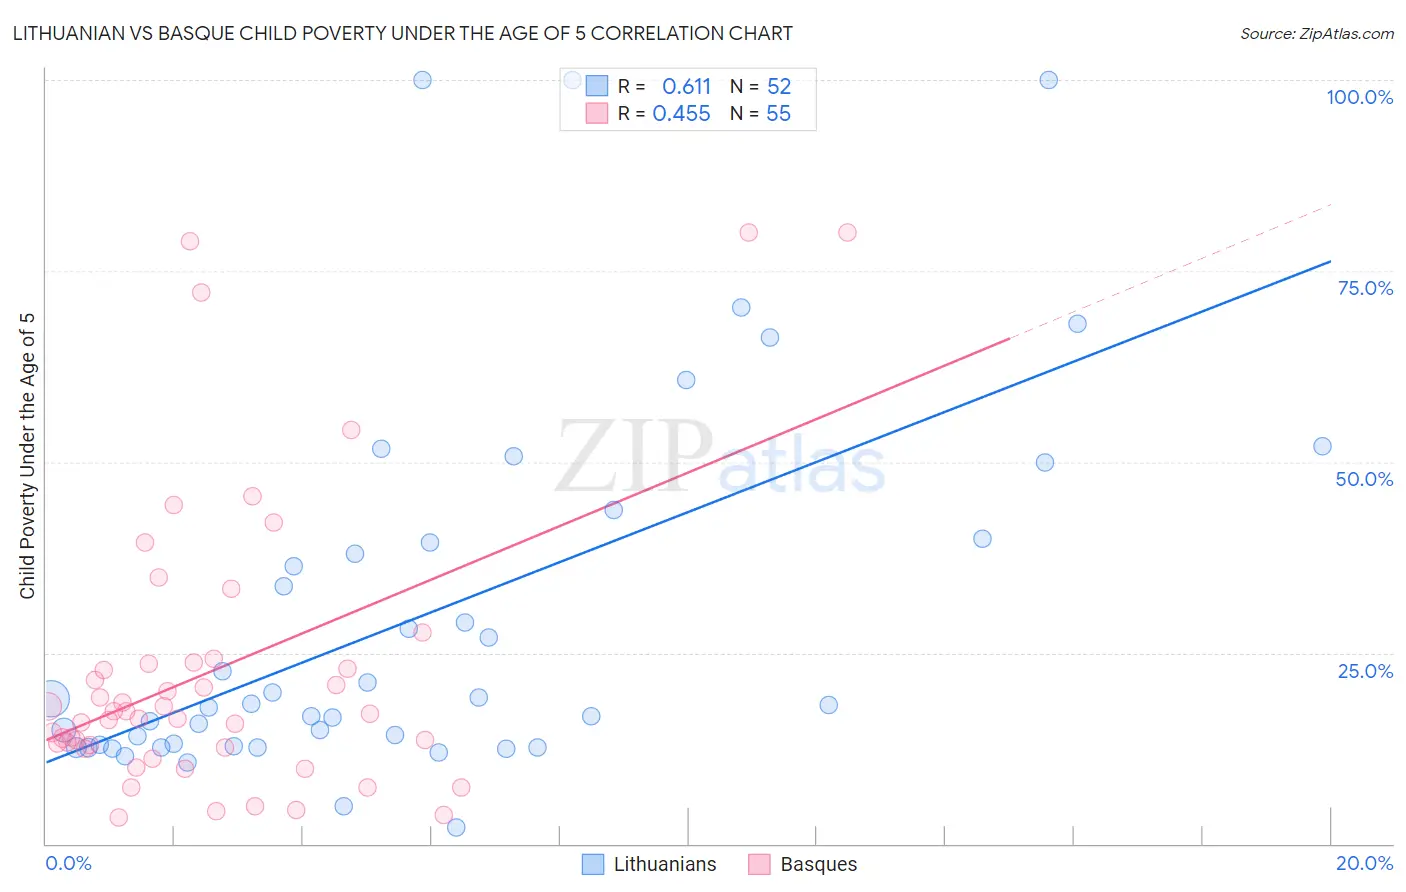 Lithuanian vs Basque Child Poverty Under the Age of 5